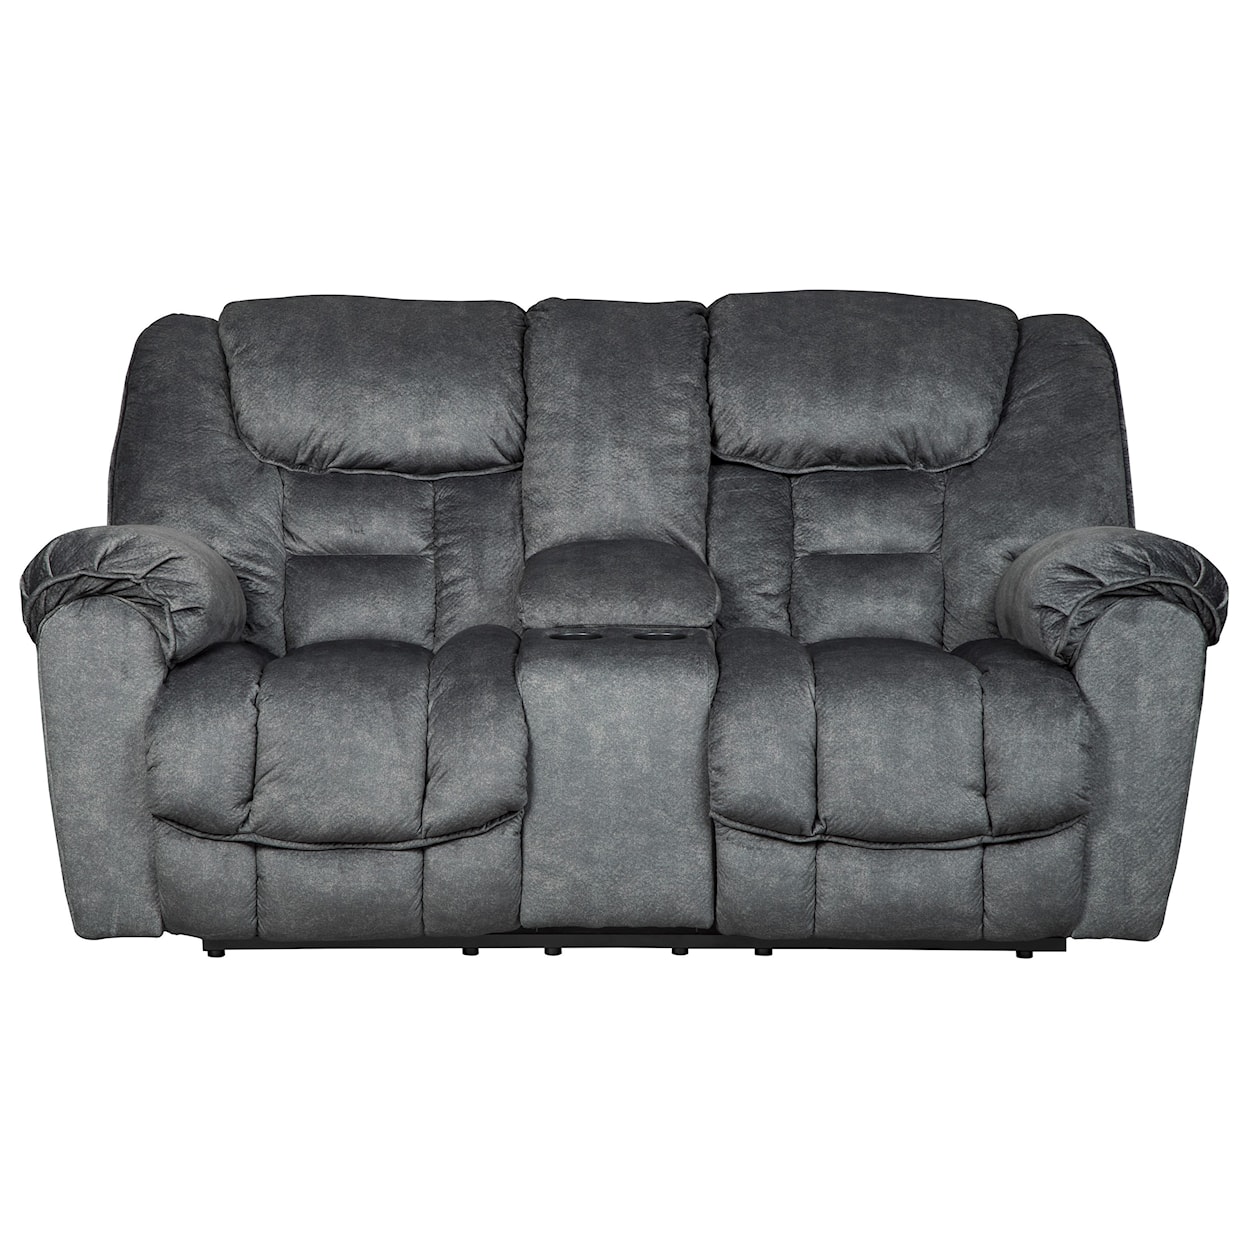 Ashley Furniture Signature Design Capehorn Double Reclining Loveseat w/ Console